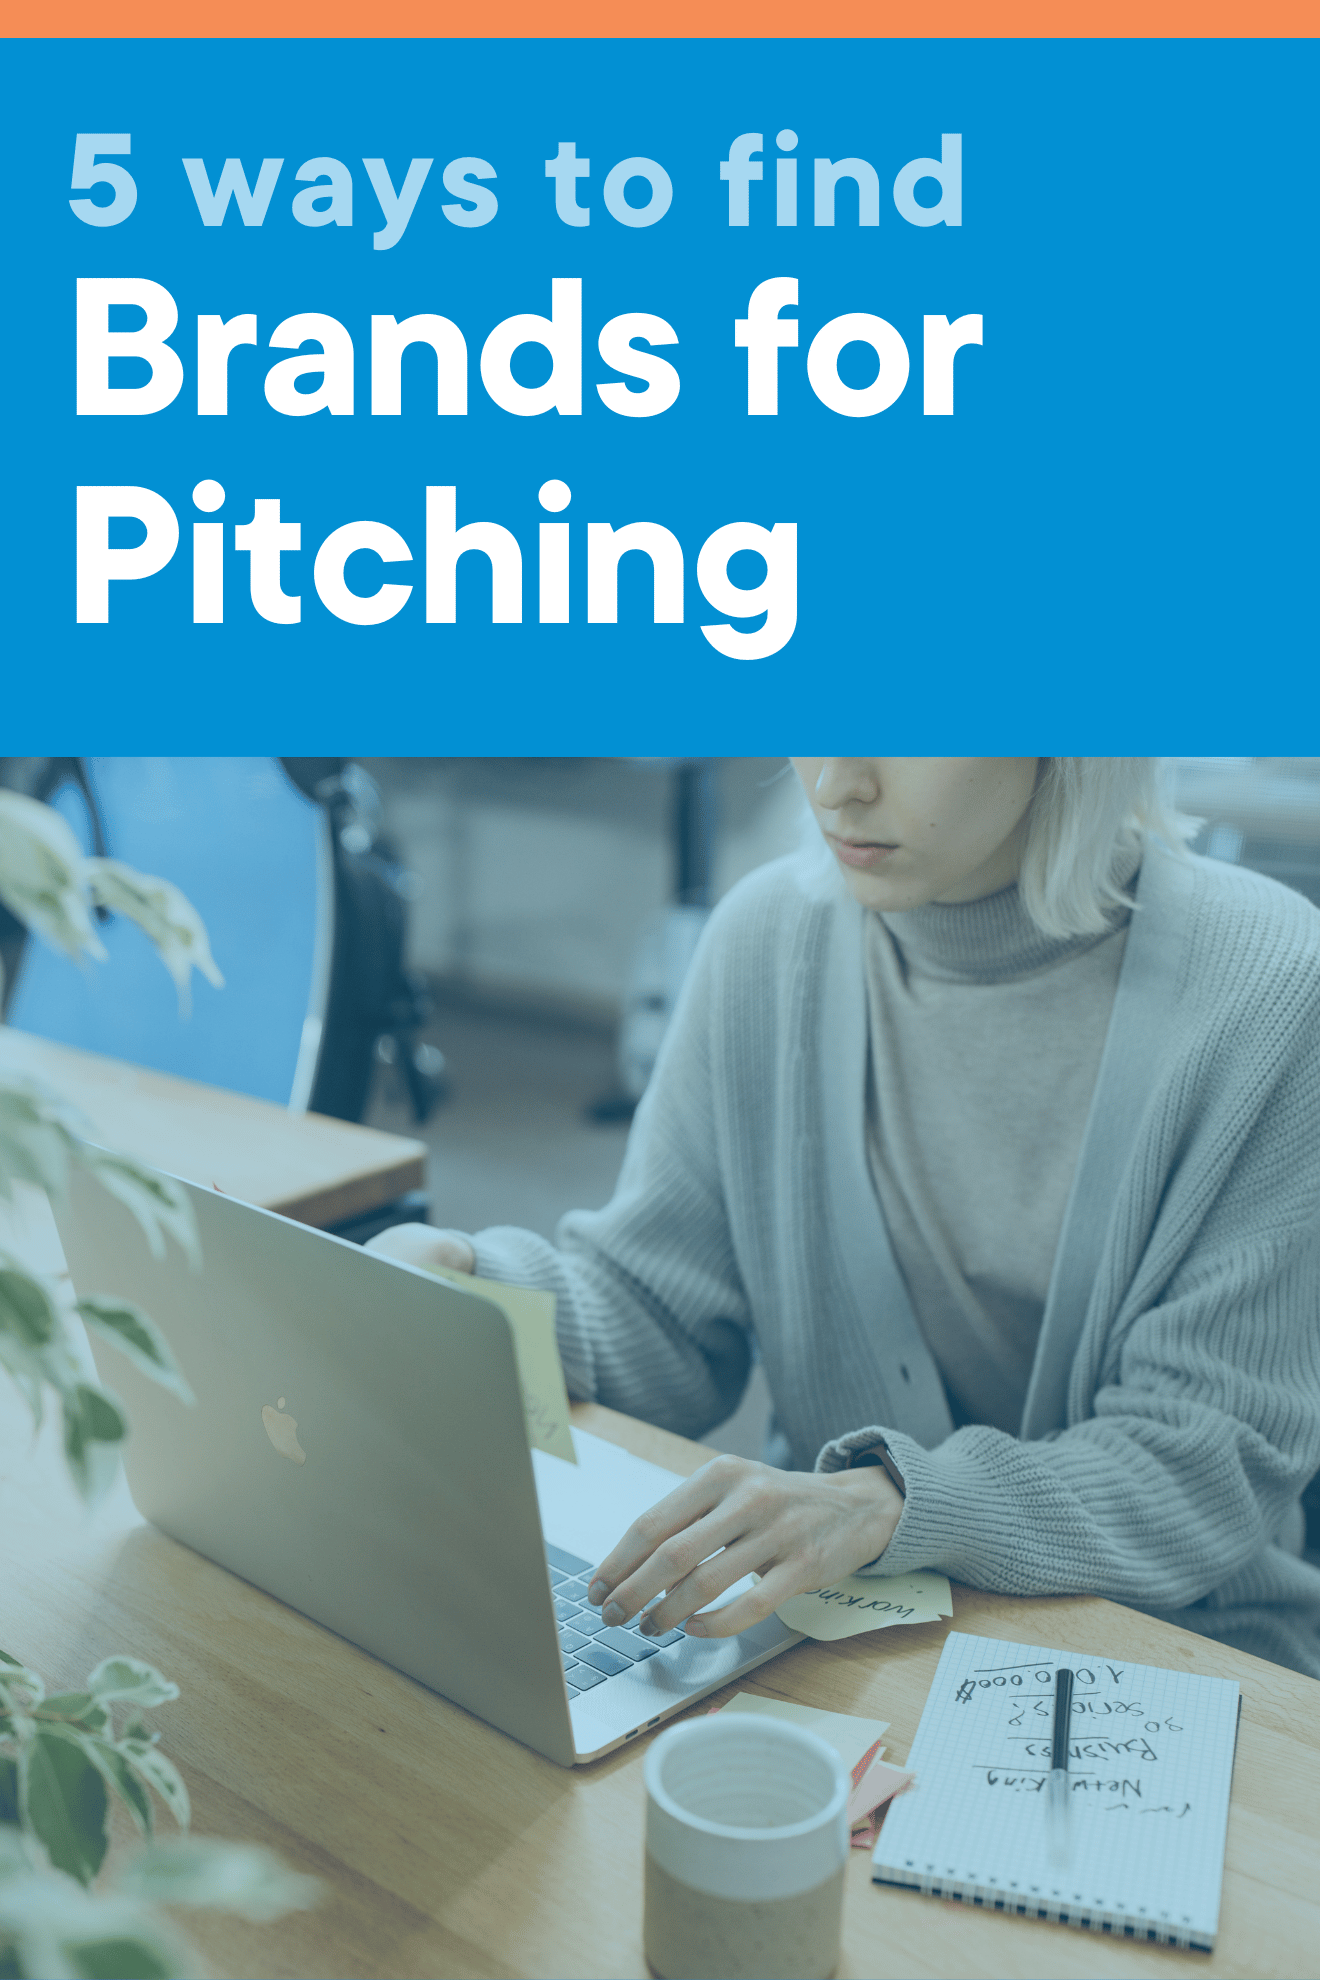 Blog cover photo with '5 Ways to Find Brands for Pitching' written across the cover and an image of an individual working on a laptop at the bottom.